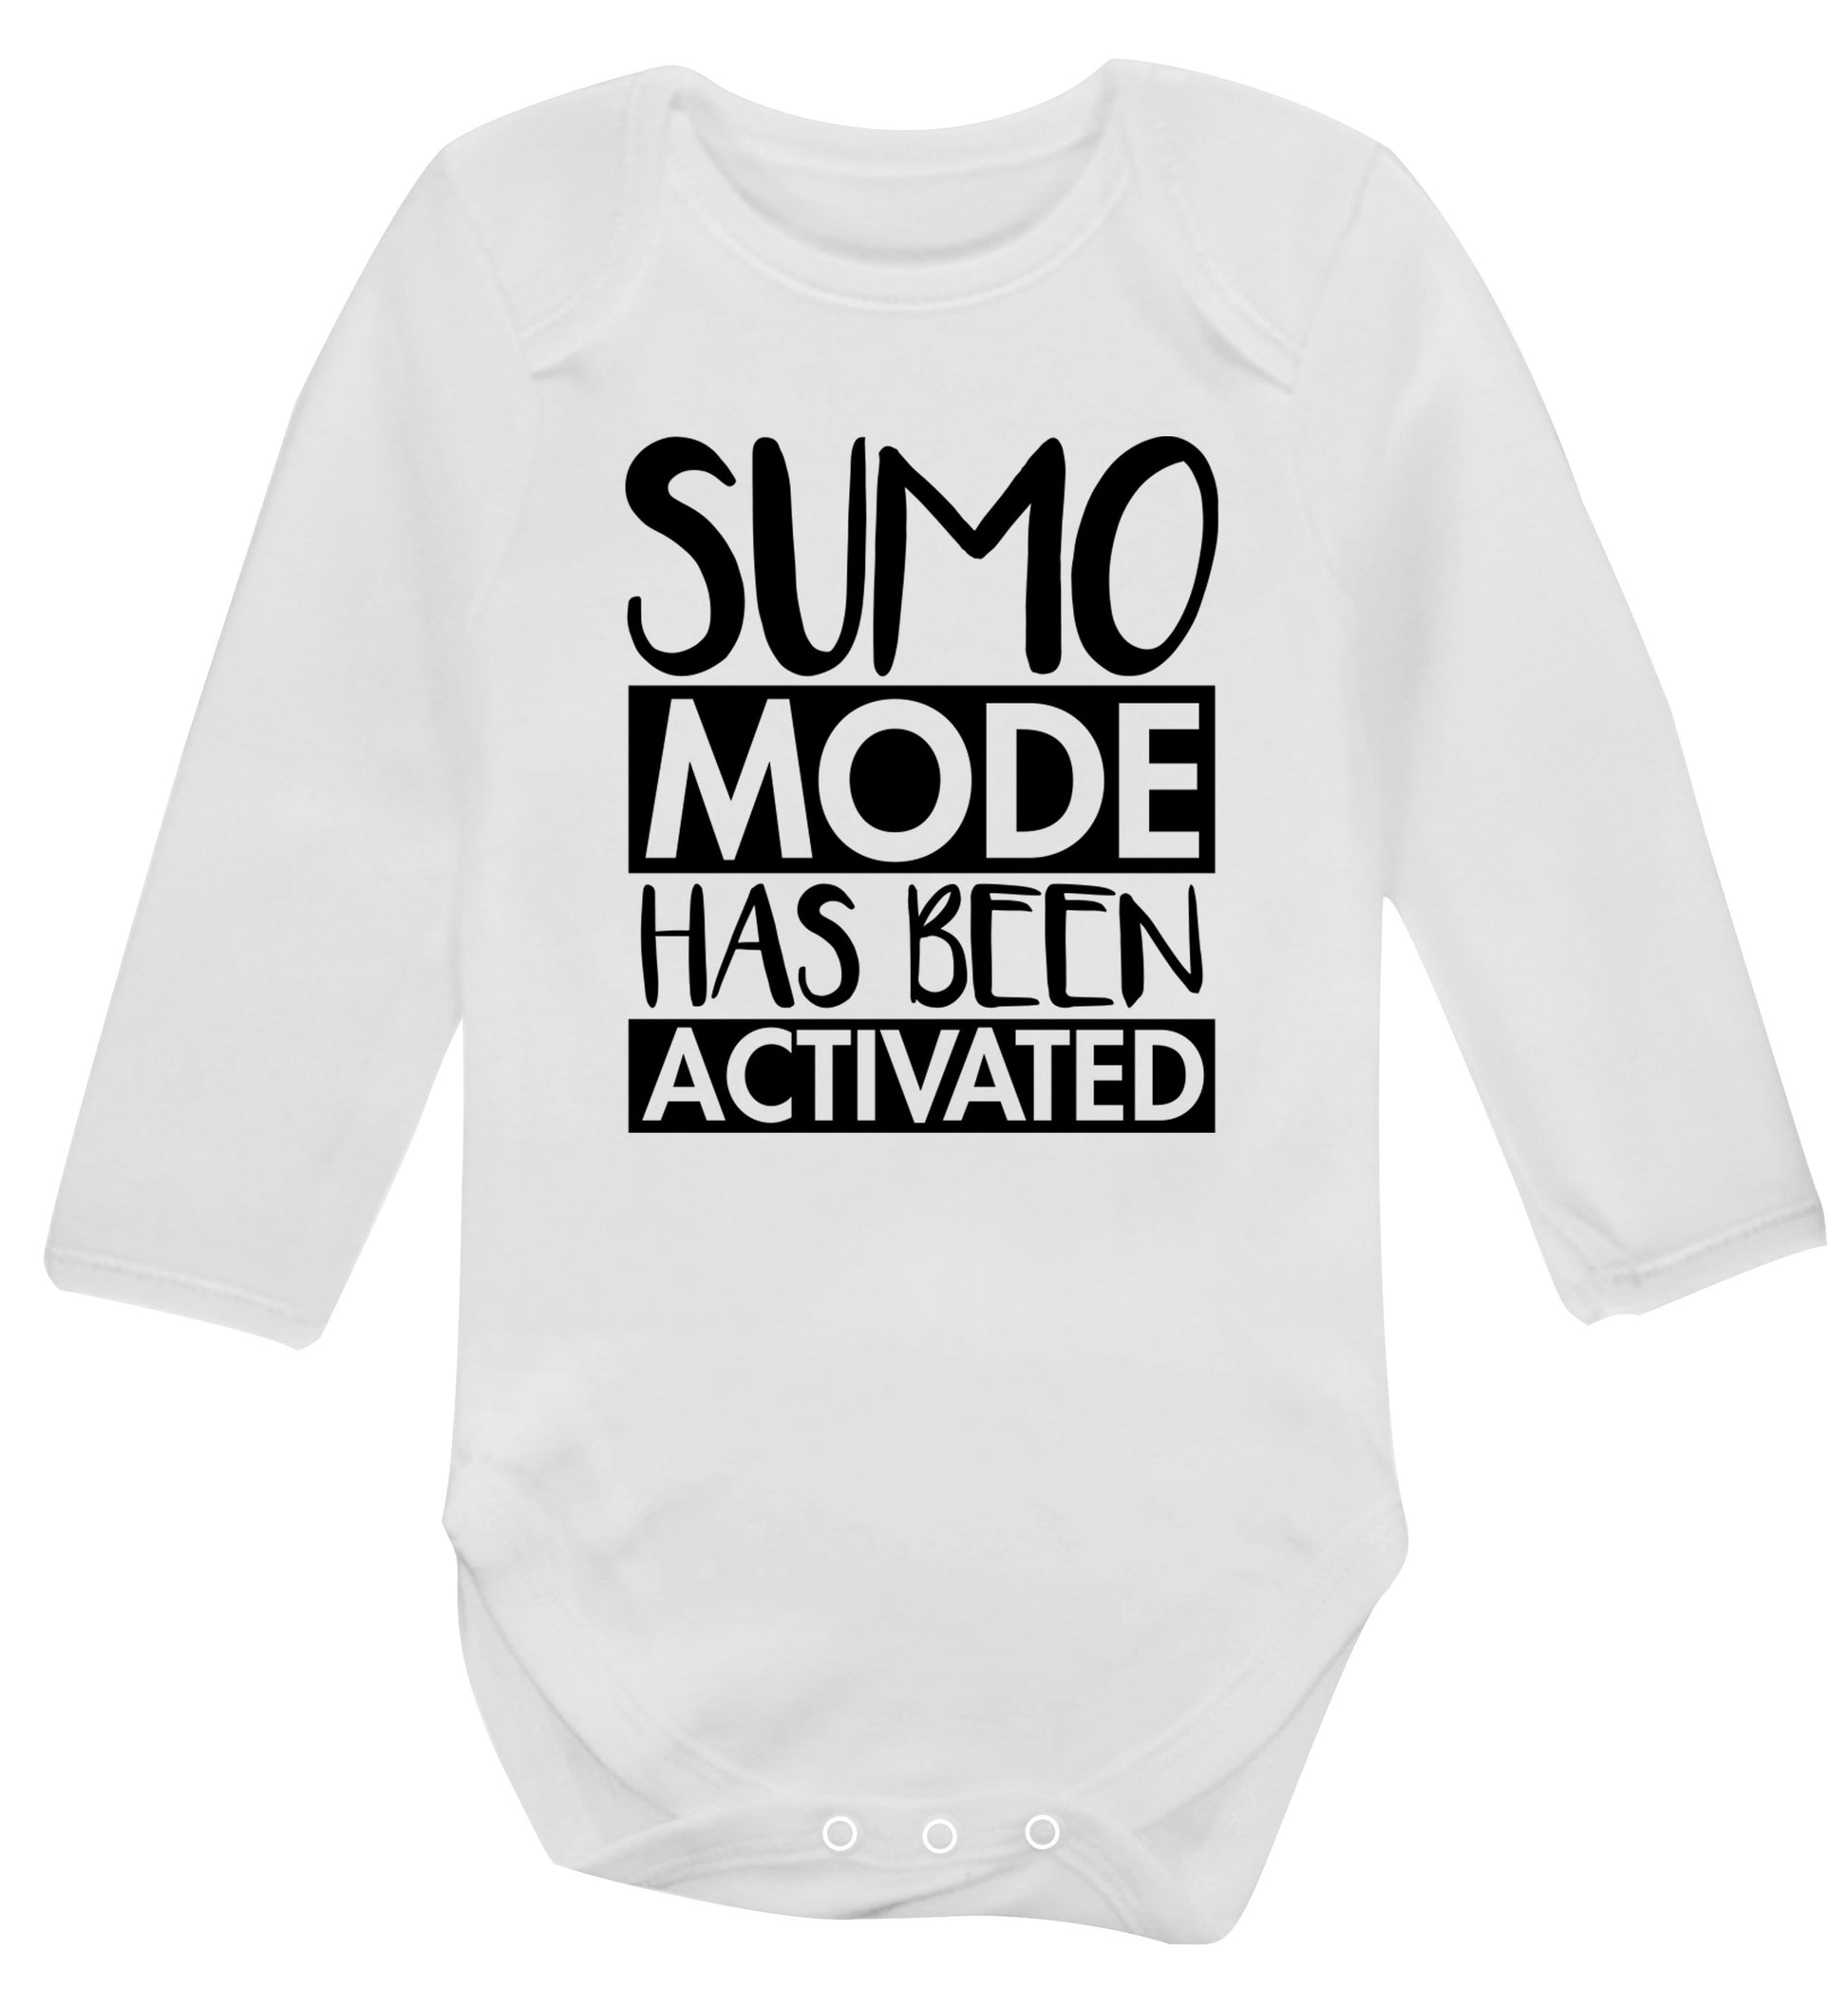 Sumo mode activated Baby Vest long sleeved white 6-12 months